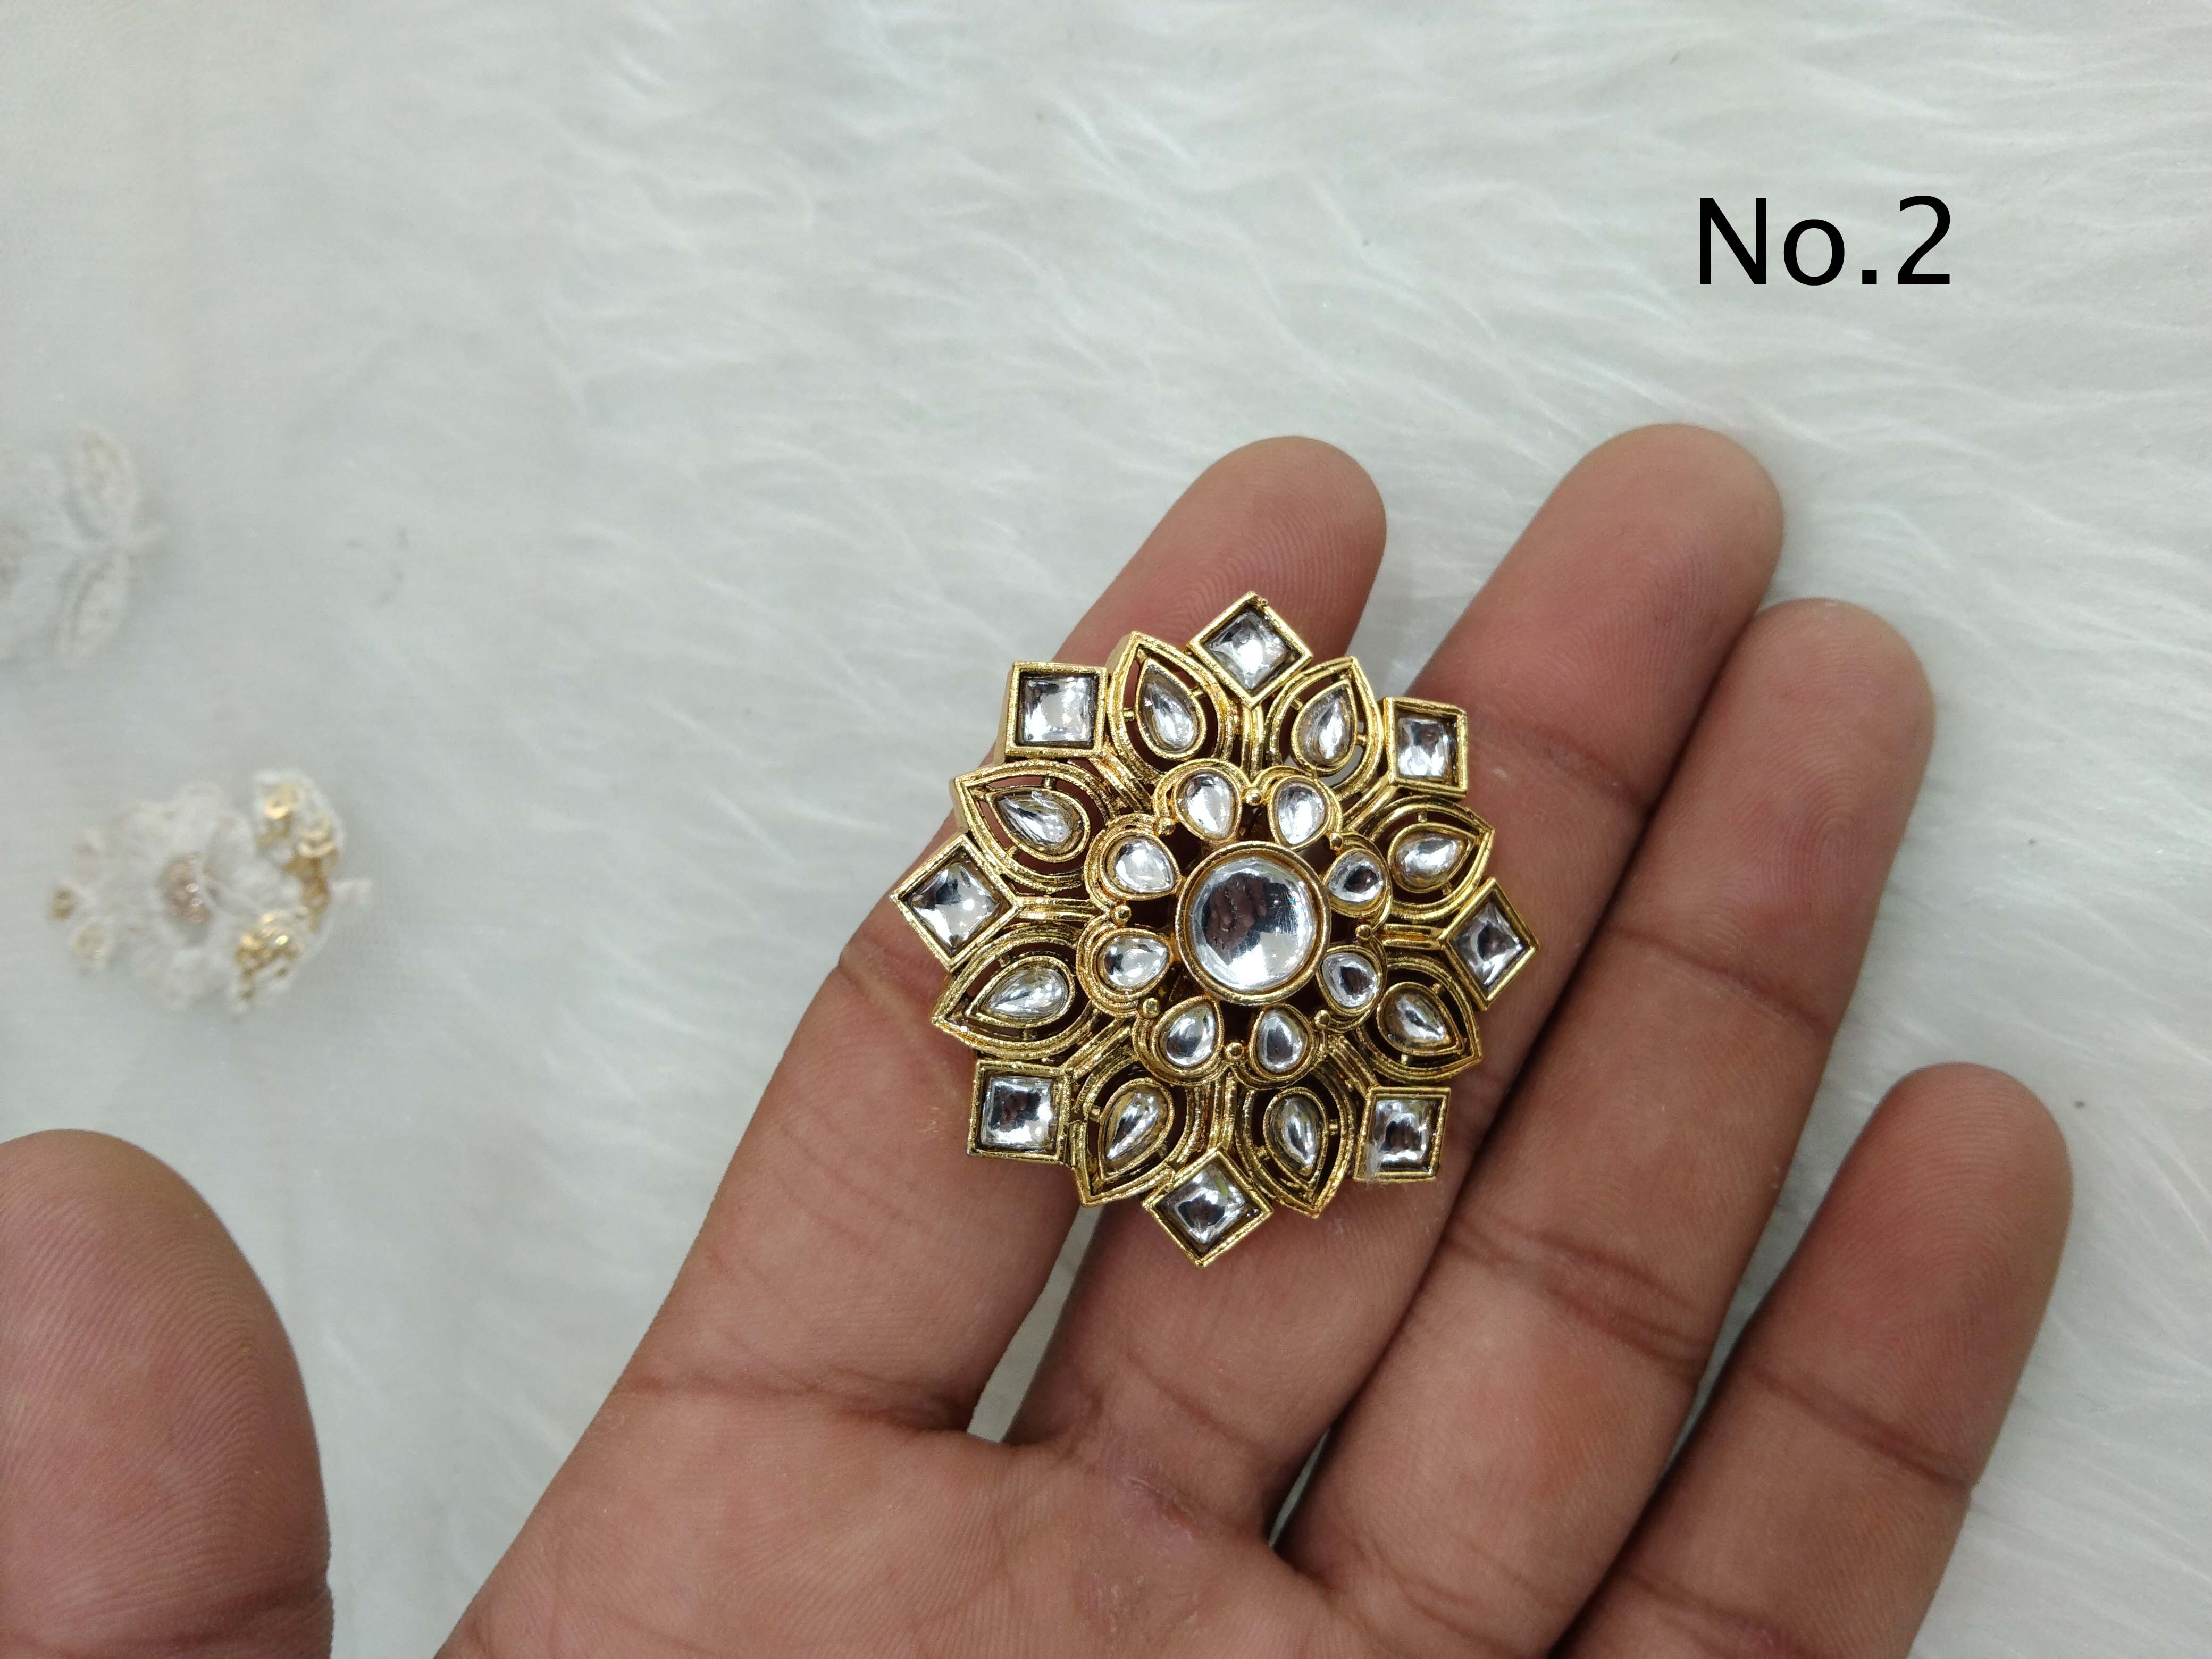 Female Alloy Fancy Big Ring, Weight: Large Weight at Rs 35 in Noida